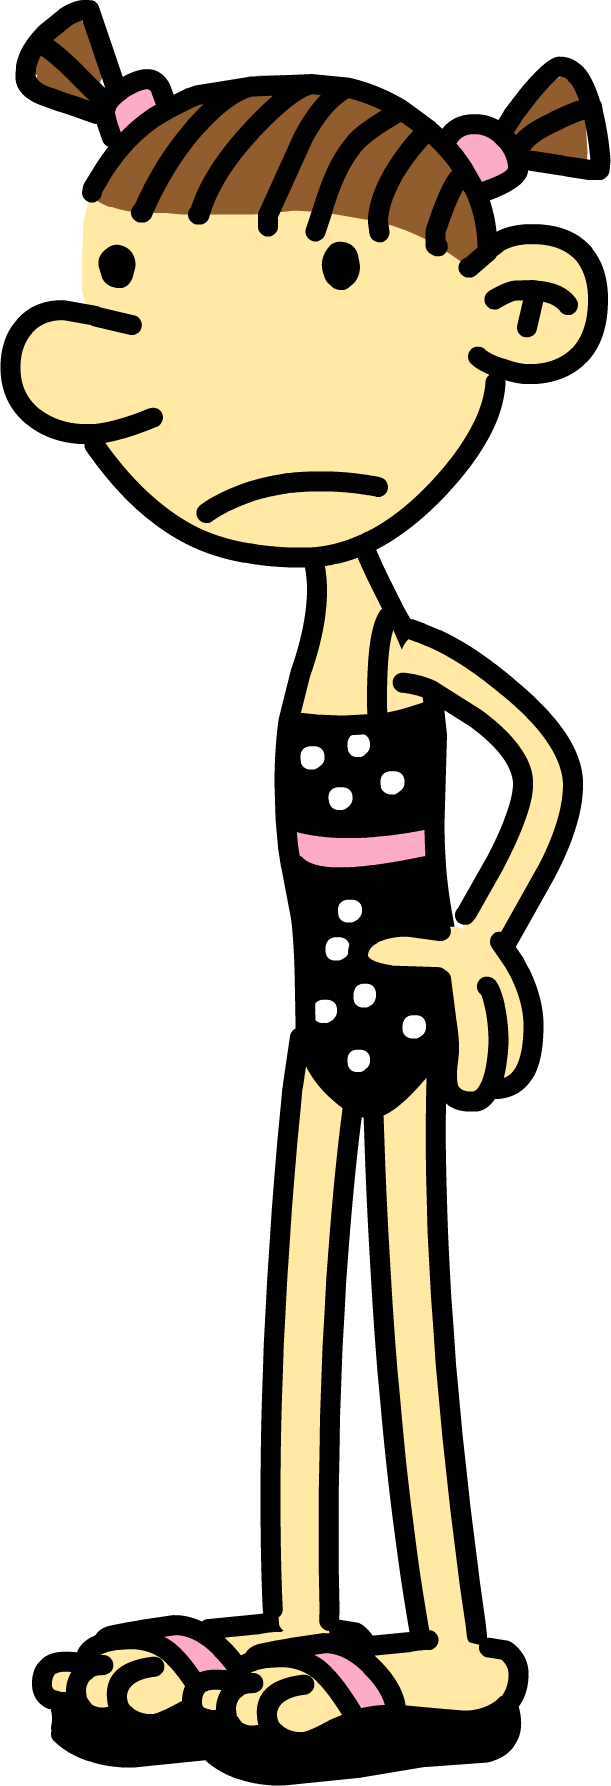 A Cartoon Character In A Swimsuit